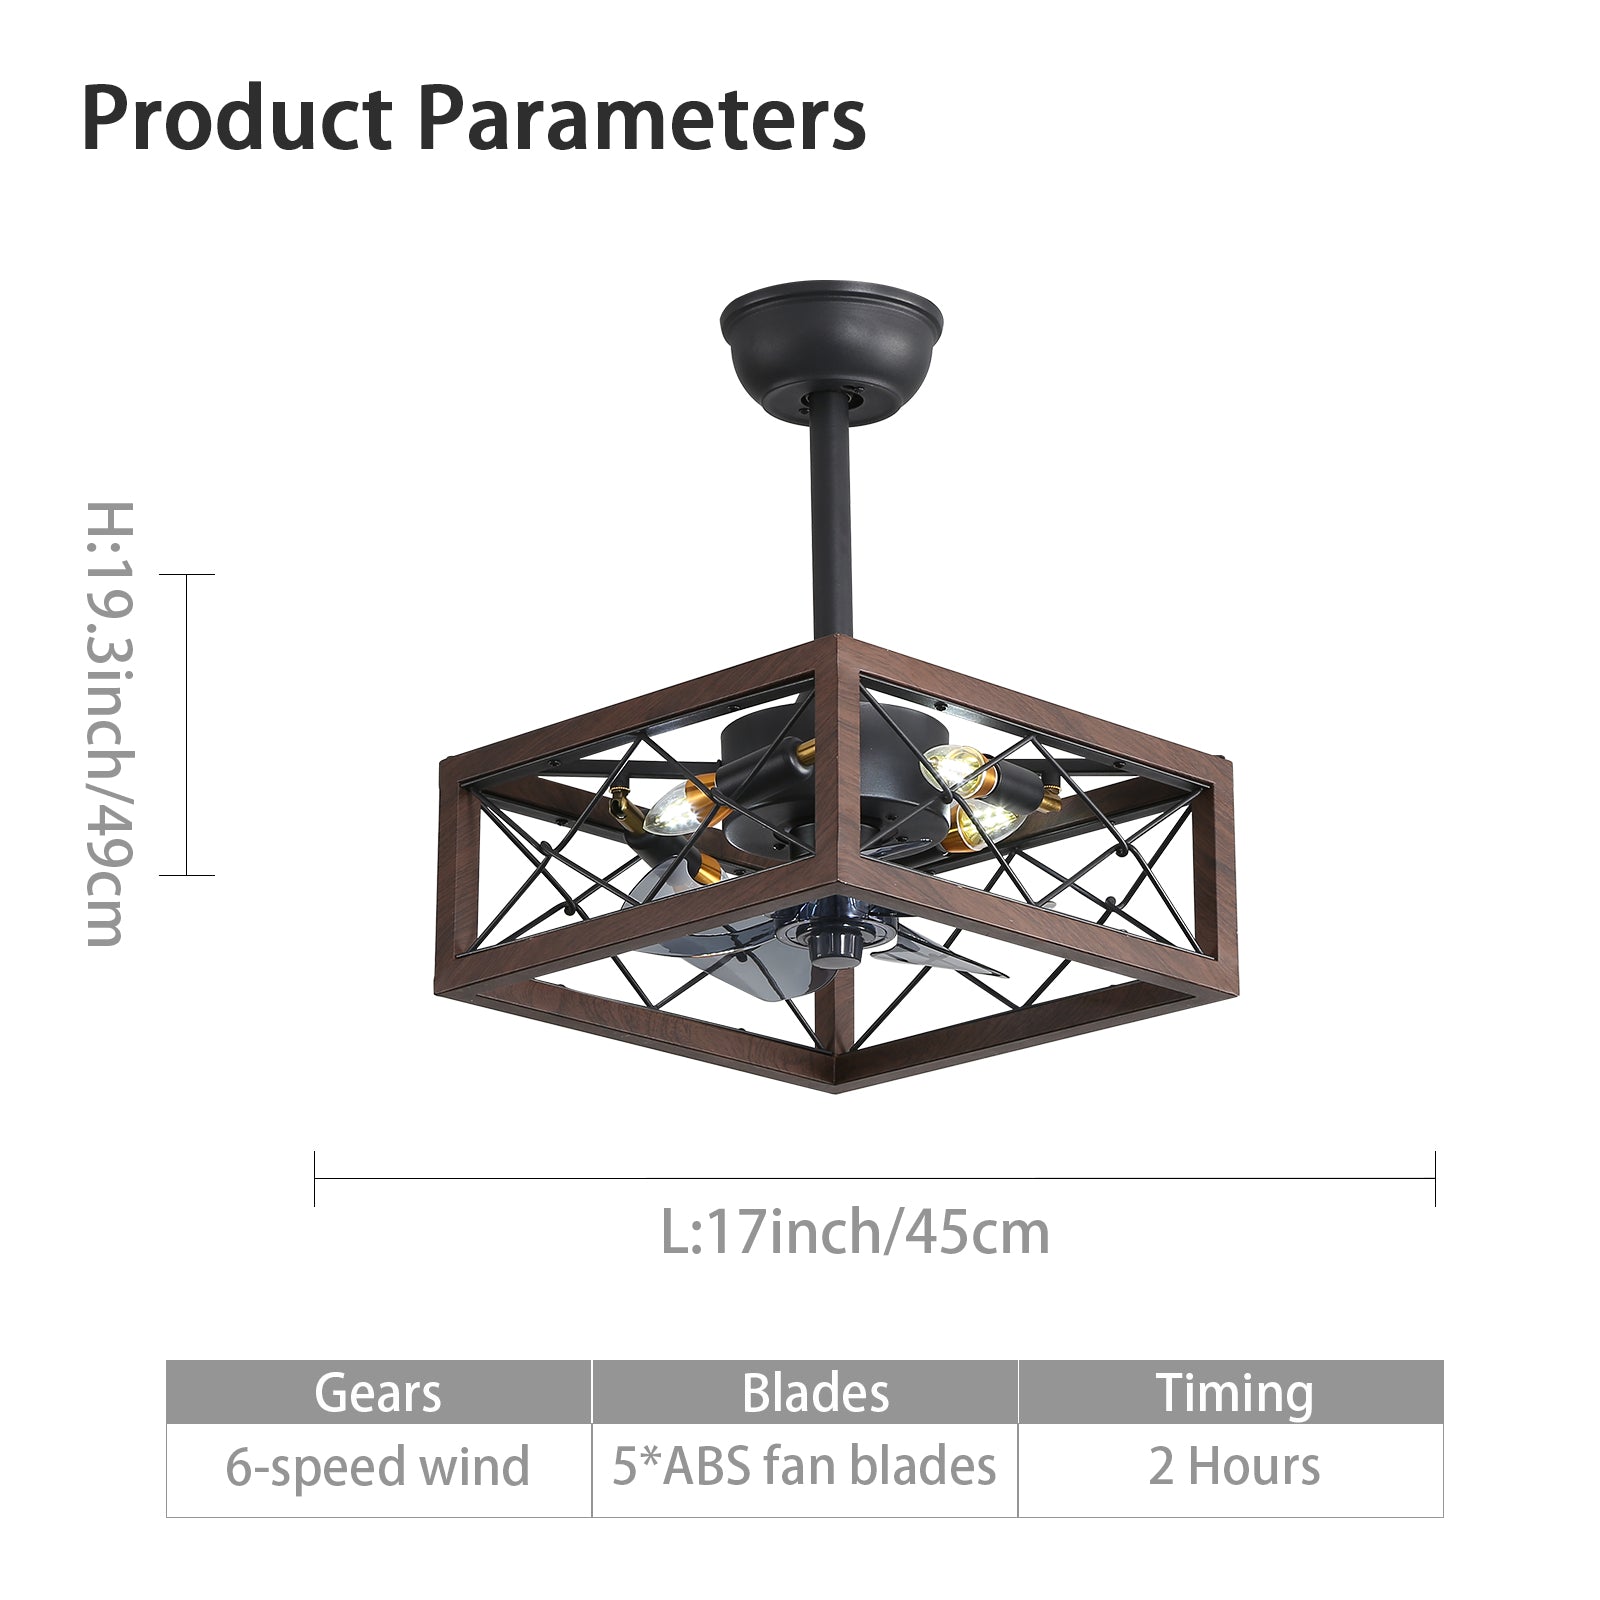 MS-0002 American retro E14 ceiling fan light, monochromatic lamp and 6 gear wind speed, can be controlled using a remote control, suitable for bedroom study dining room etc